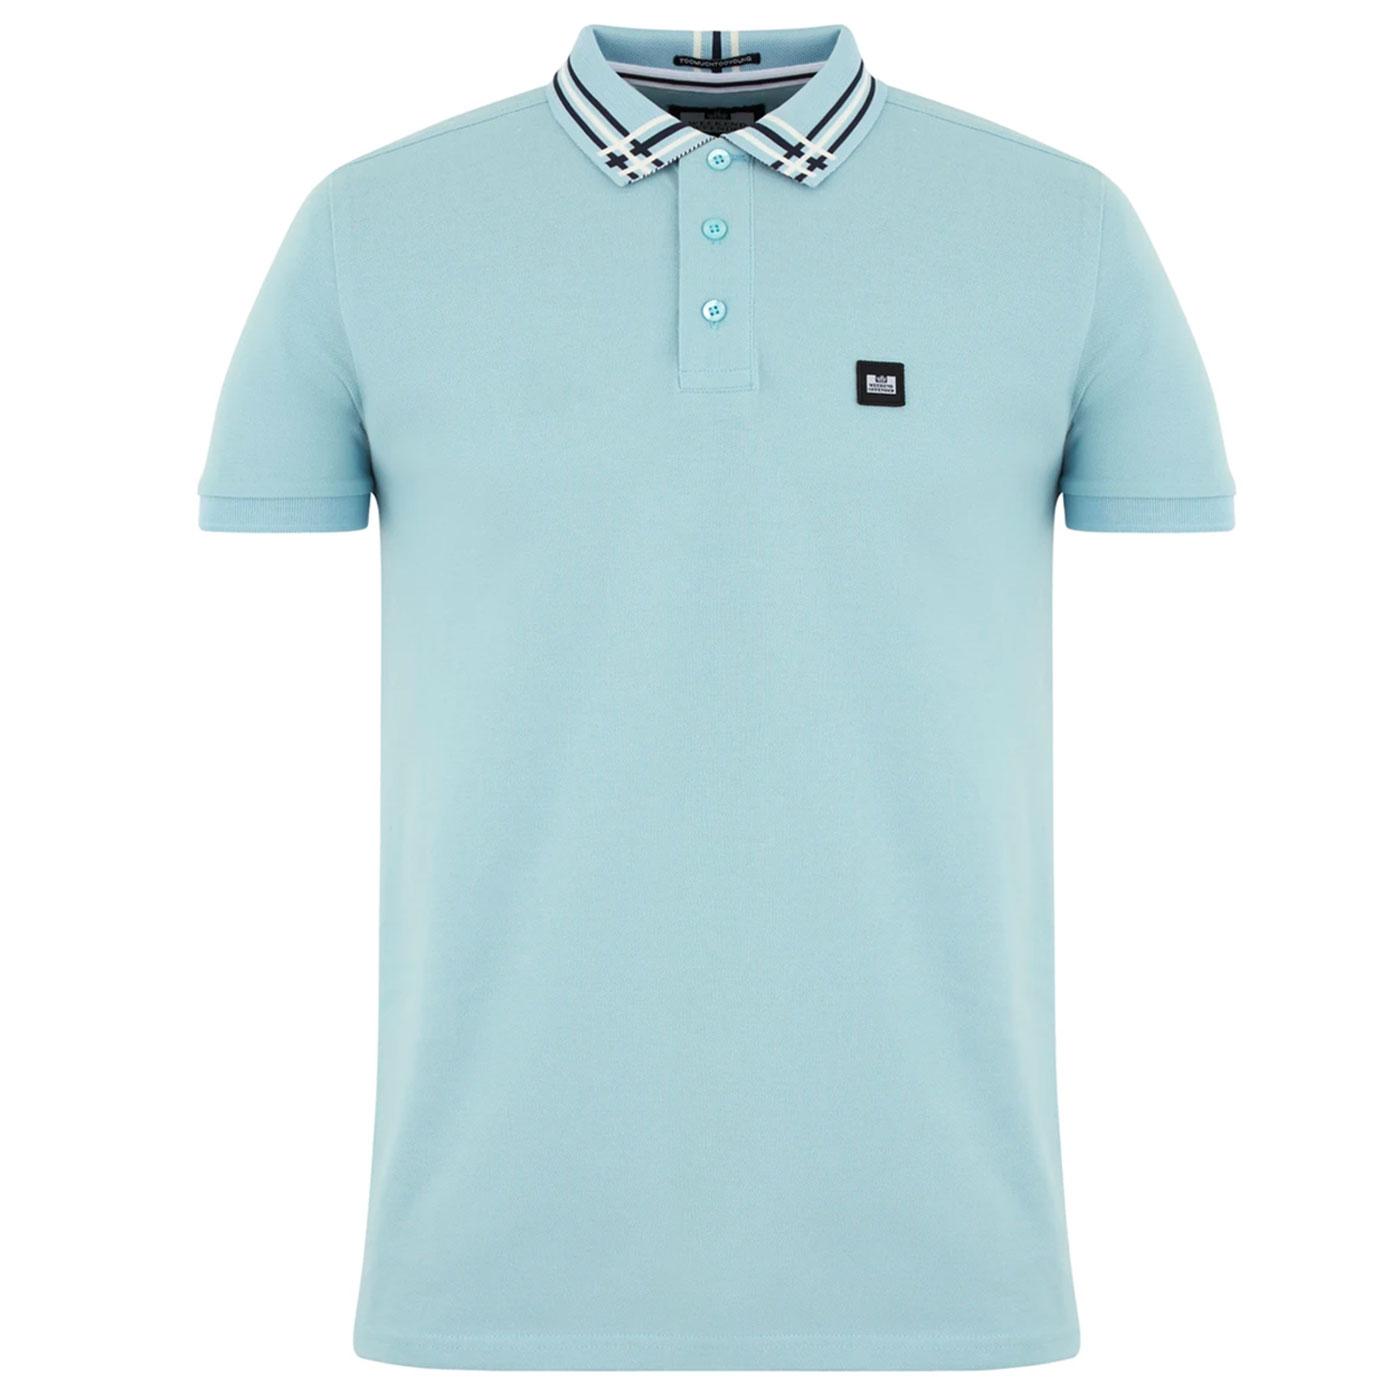 Rivera WEEKEND OFFENDER Mod Tipped Polo Top (C)